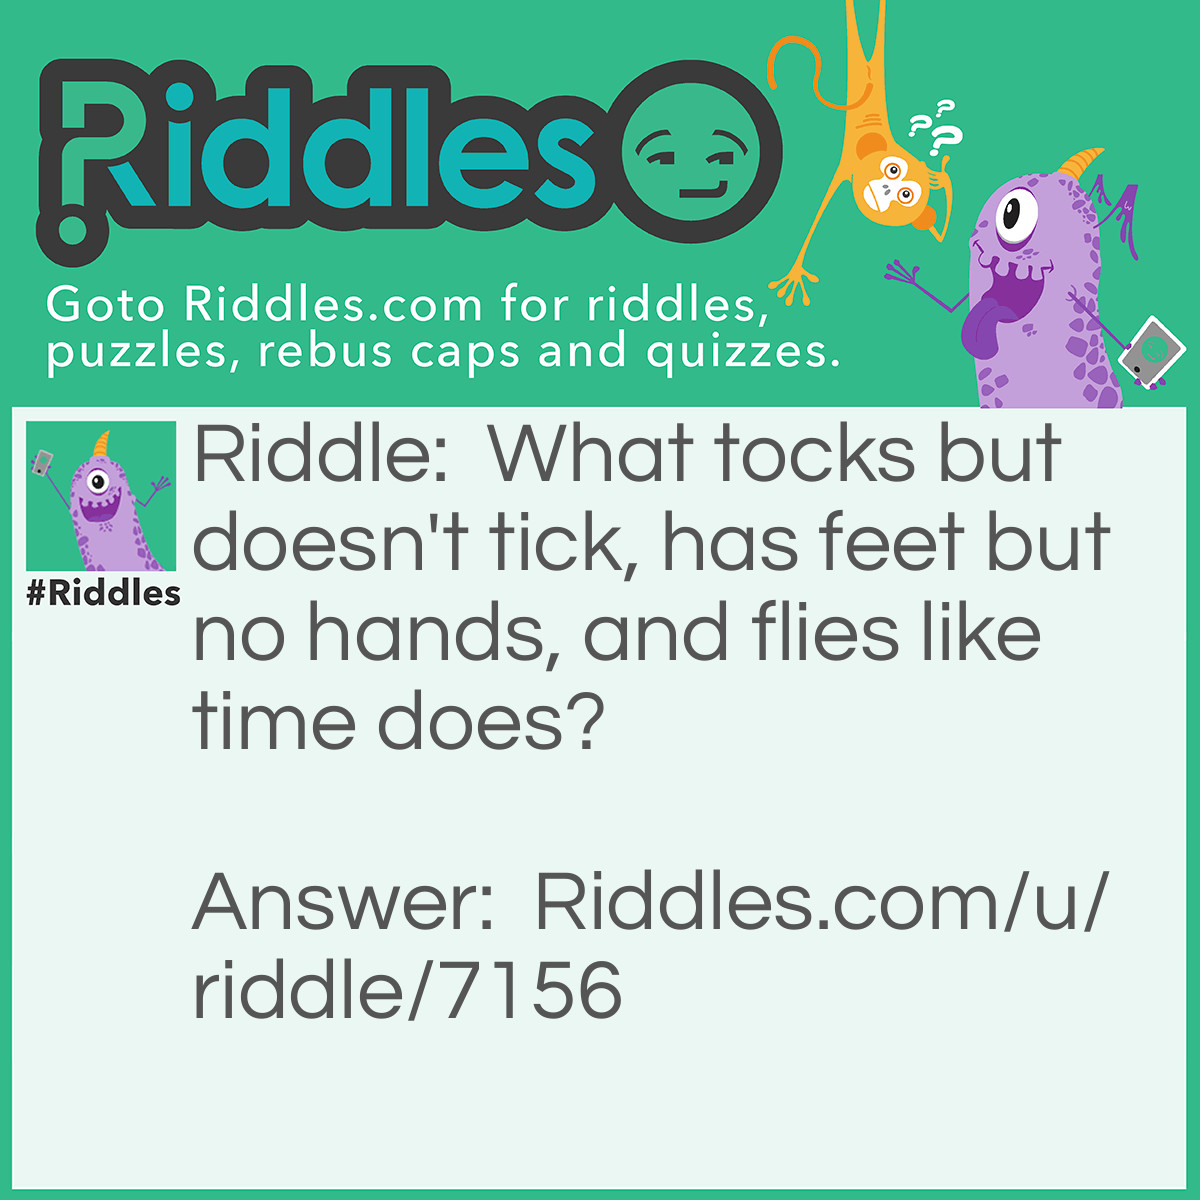 Riddle: What tocks but doesn't tick, has feet but no hands, and flies like time does? Answer: A Woodpecker.